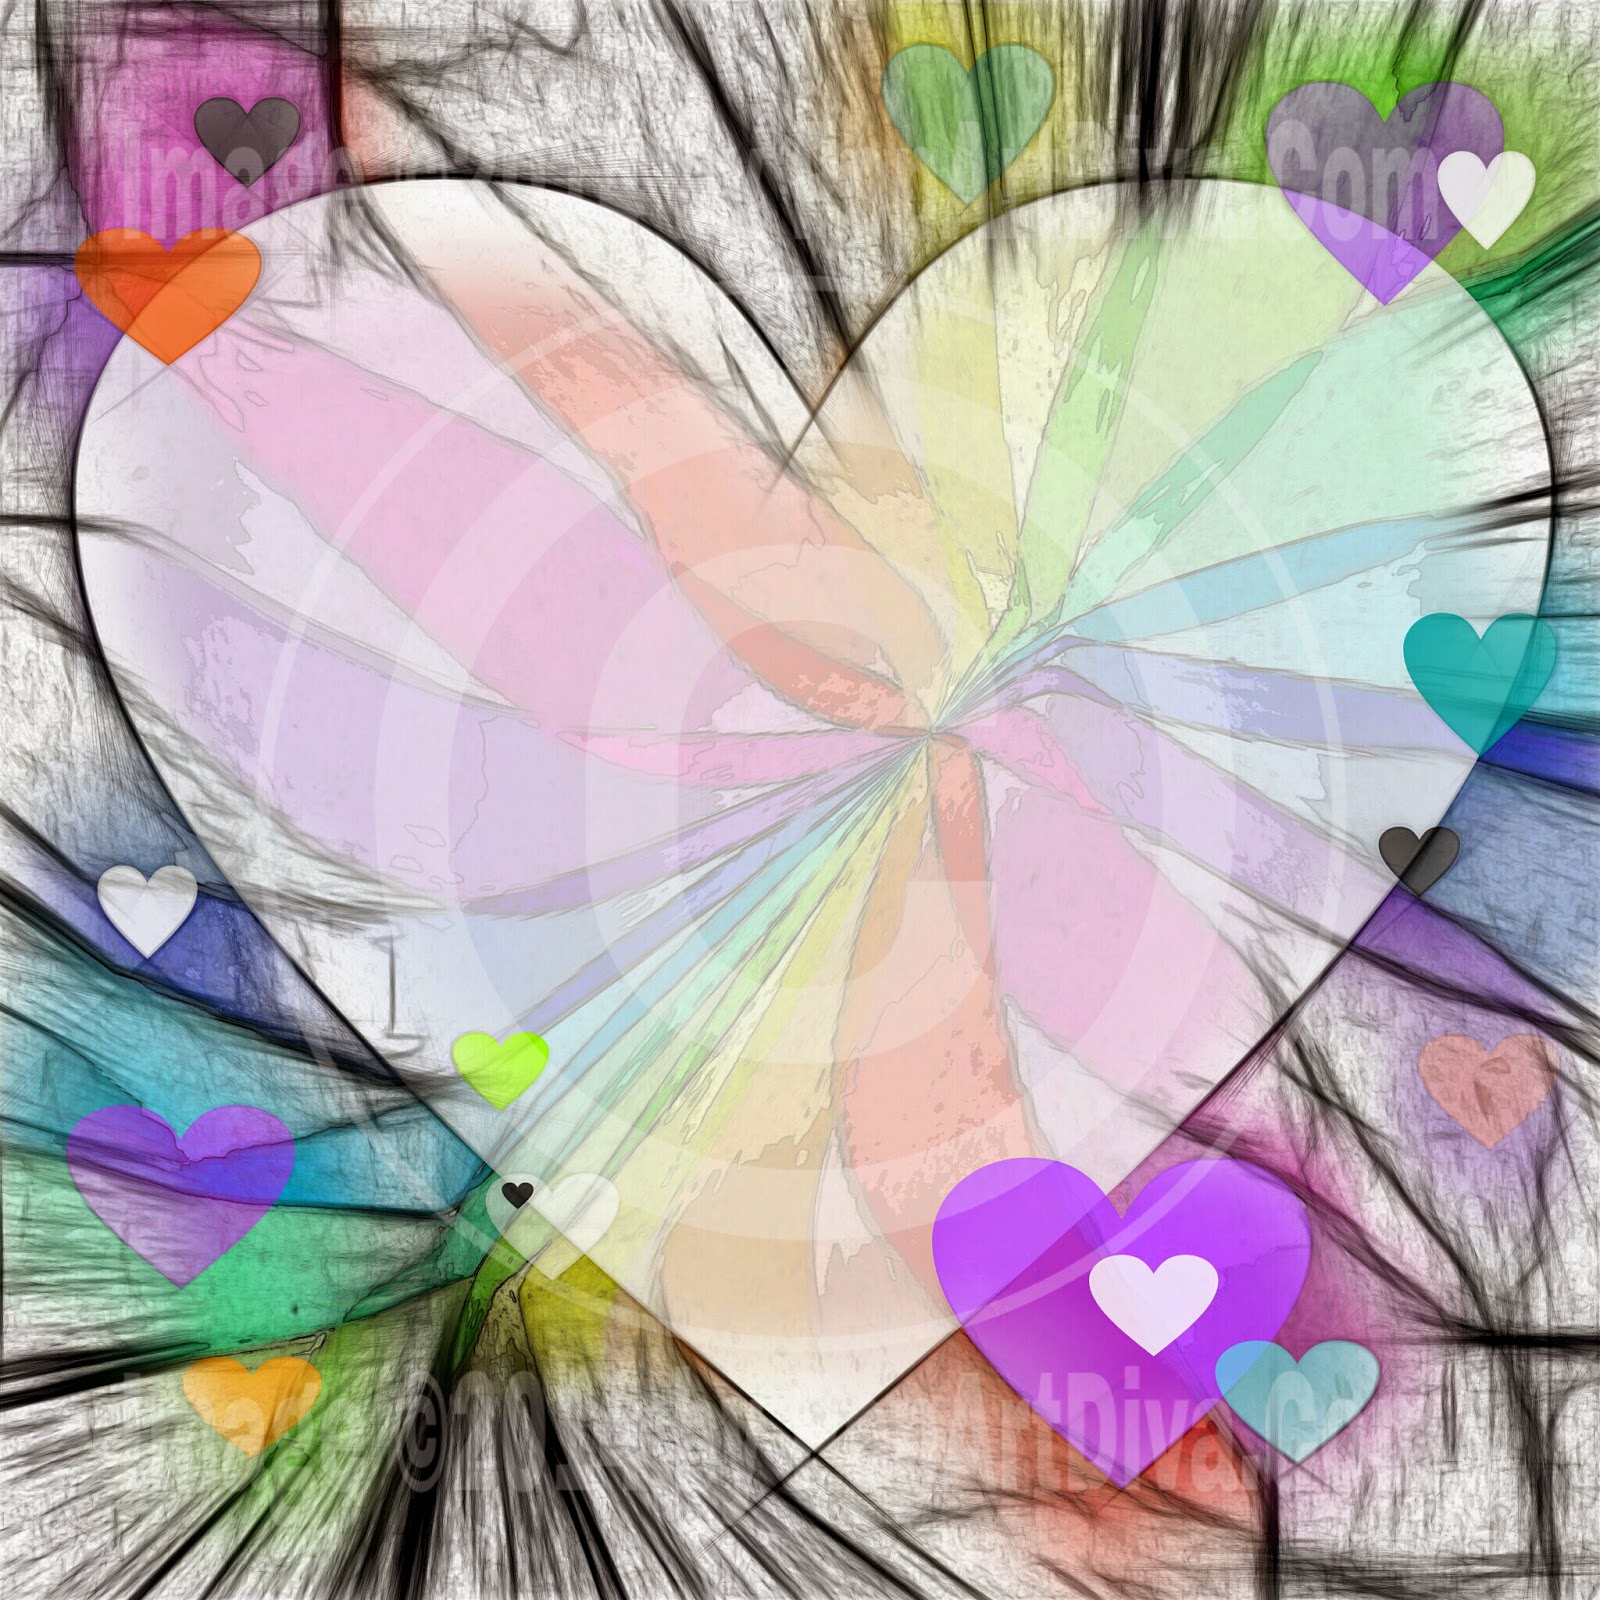 http://store.payloadz.com/details/2084286-photos-and-images-clip-art-kaleidoscope-heart-frame-border-web-graphic.html